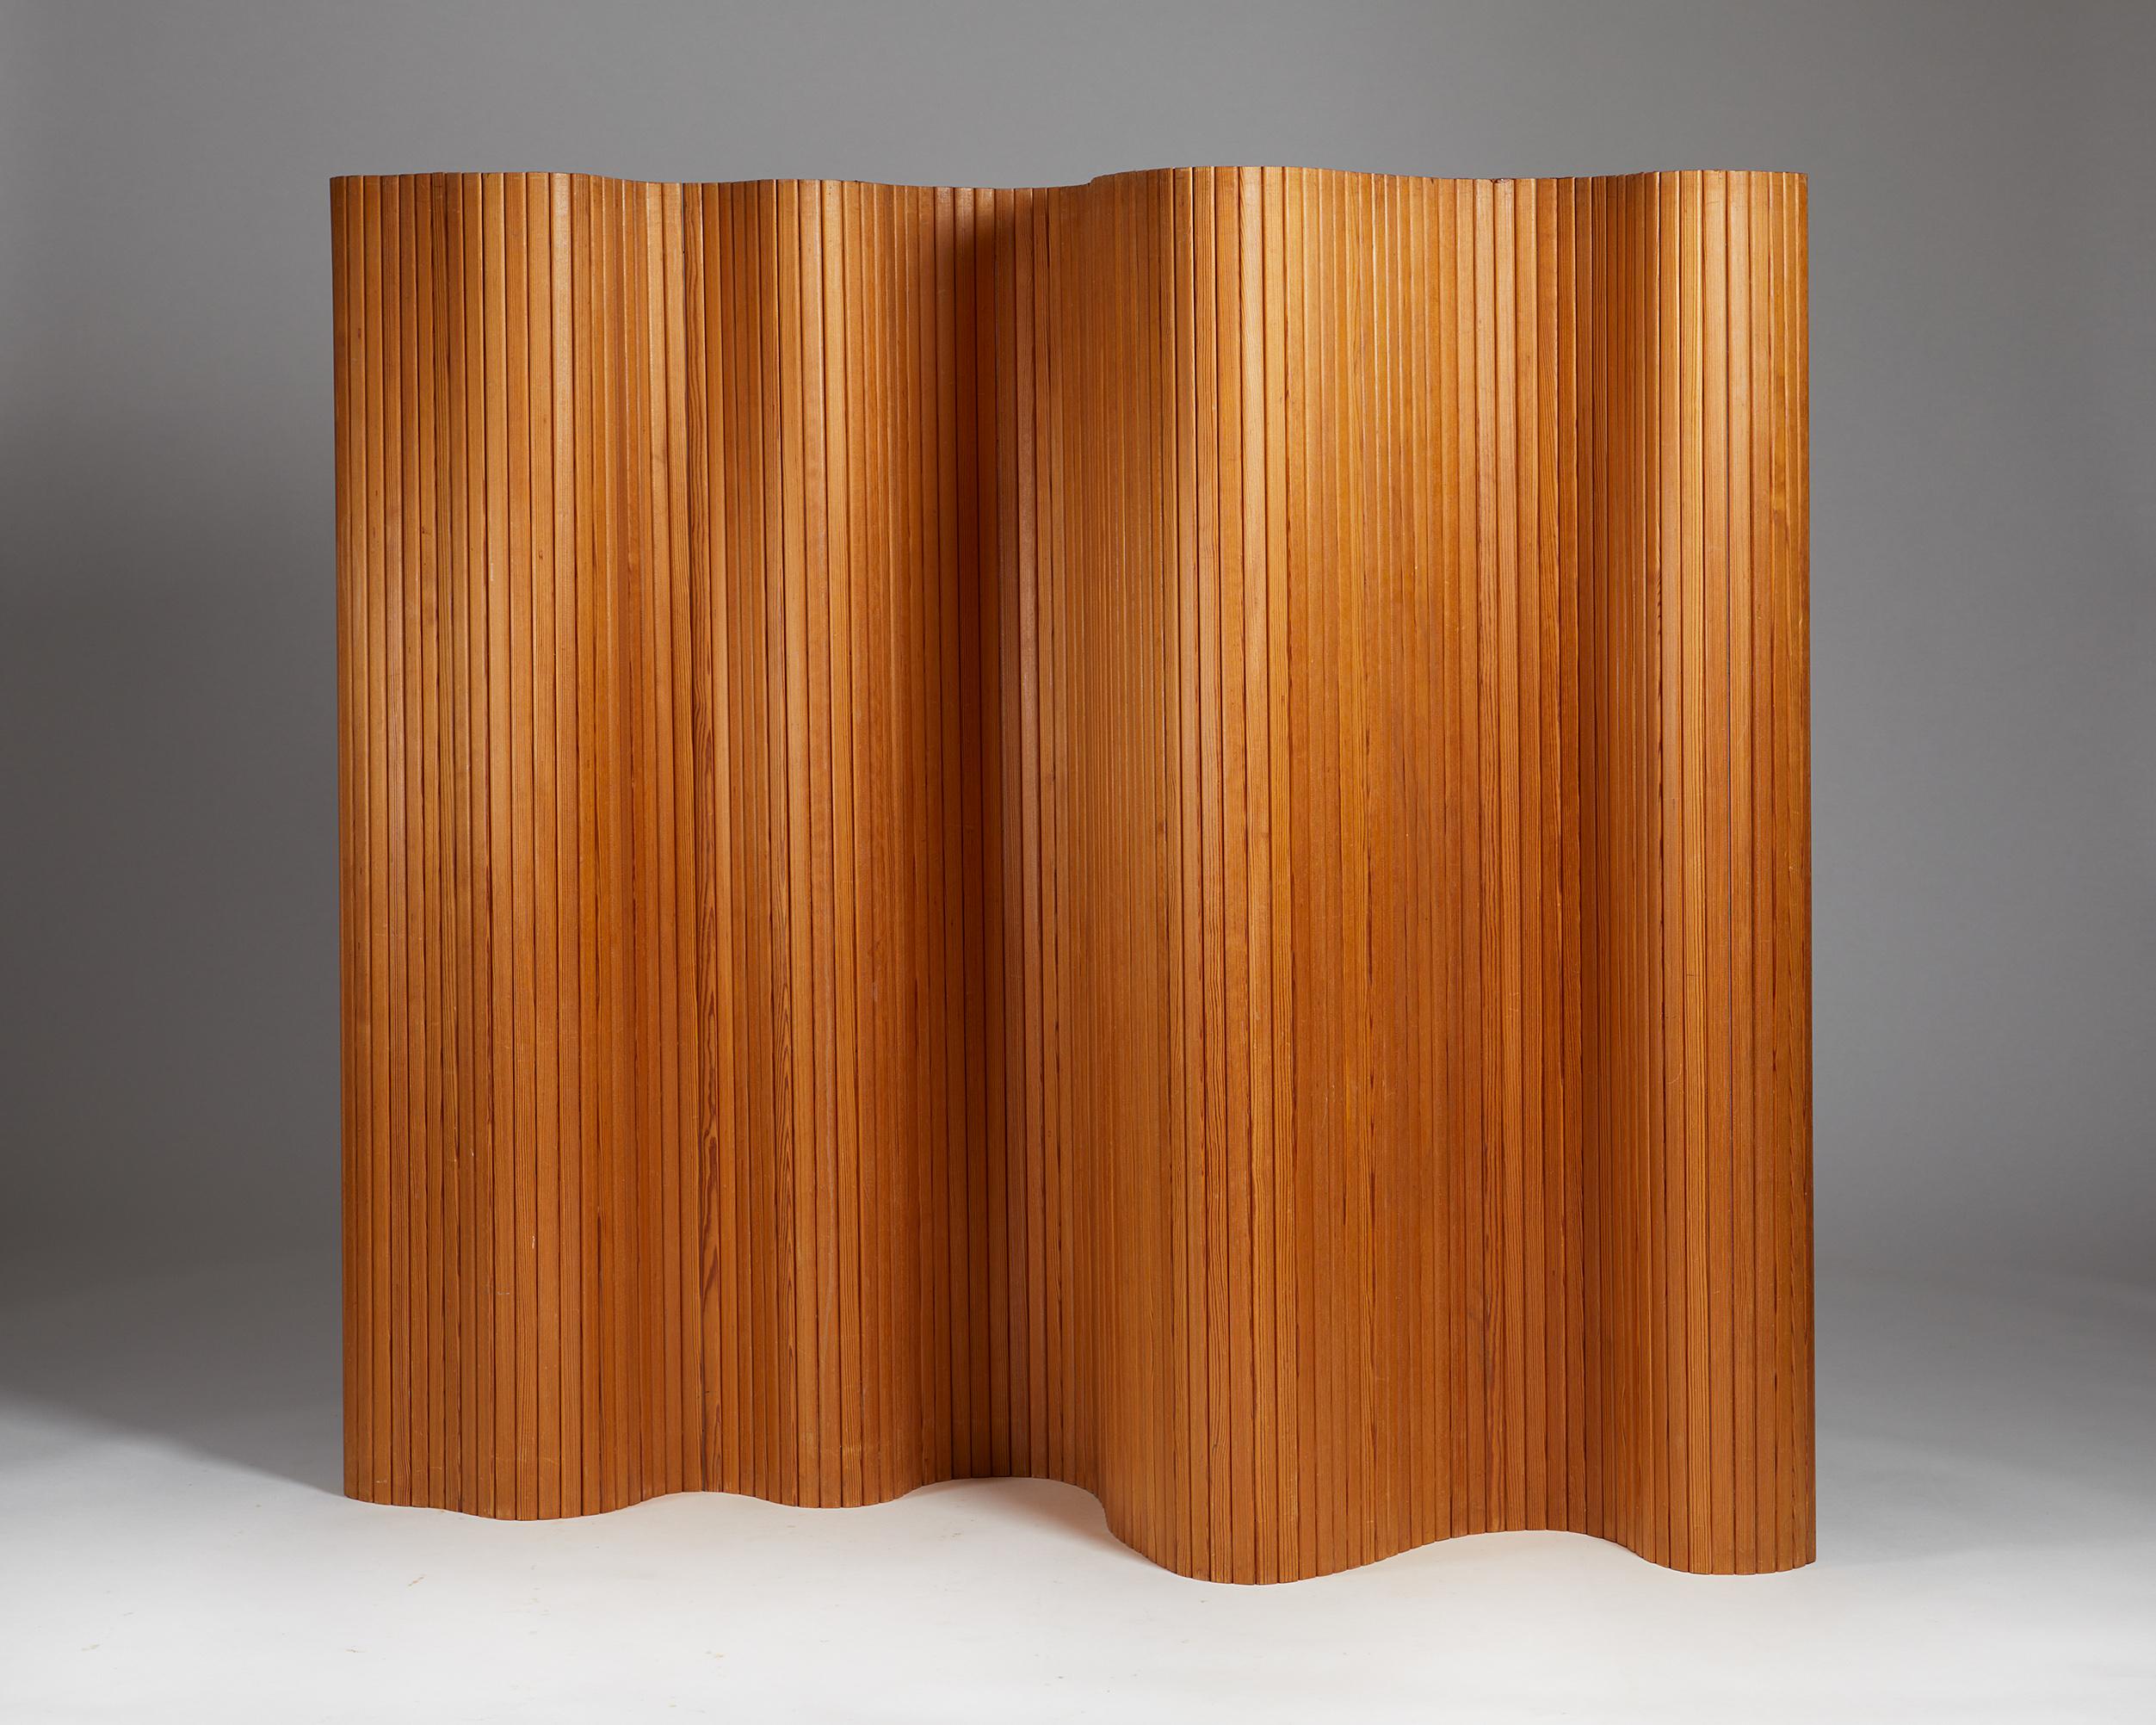 Folding 'Screen 100' designed by Alvar Aalto for Artek,
Finland. 1936.
Pine.

Alvar Aalto’s 'Screen 100' designed in 1936 is a sculptural room divider made entirely of individual pine slats. This is the rarer long version of the design — the